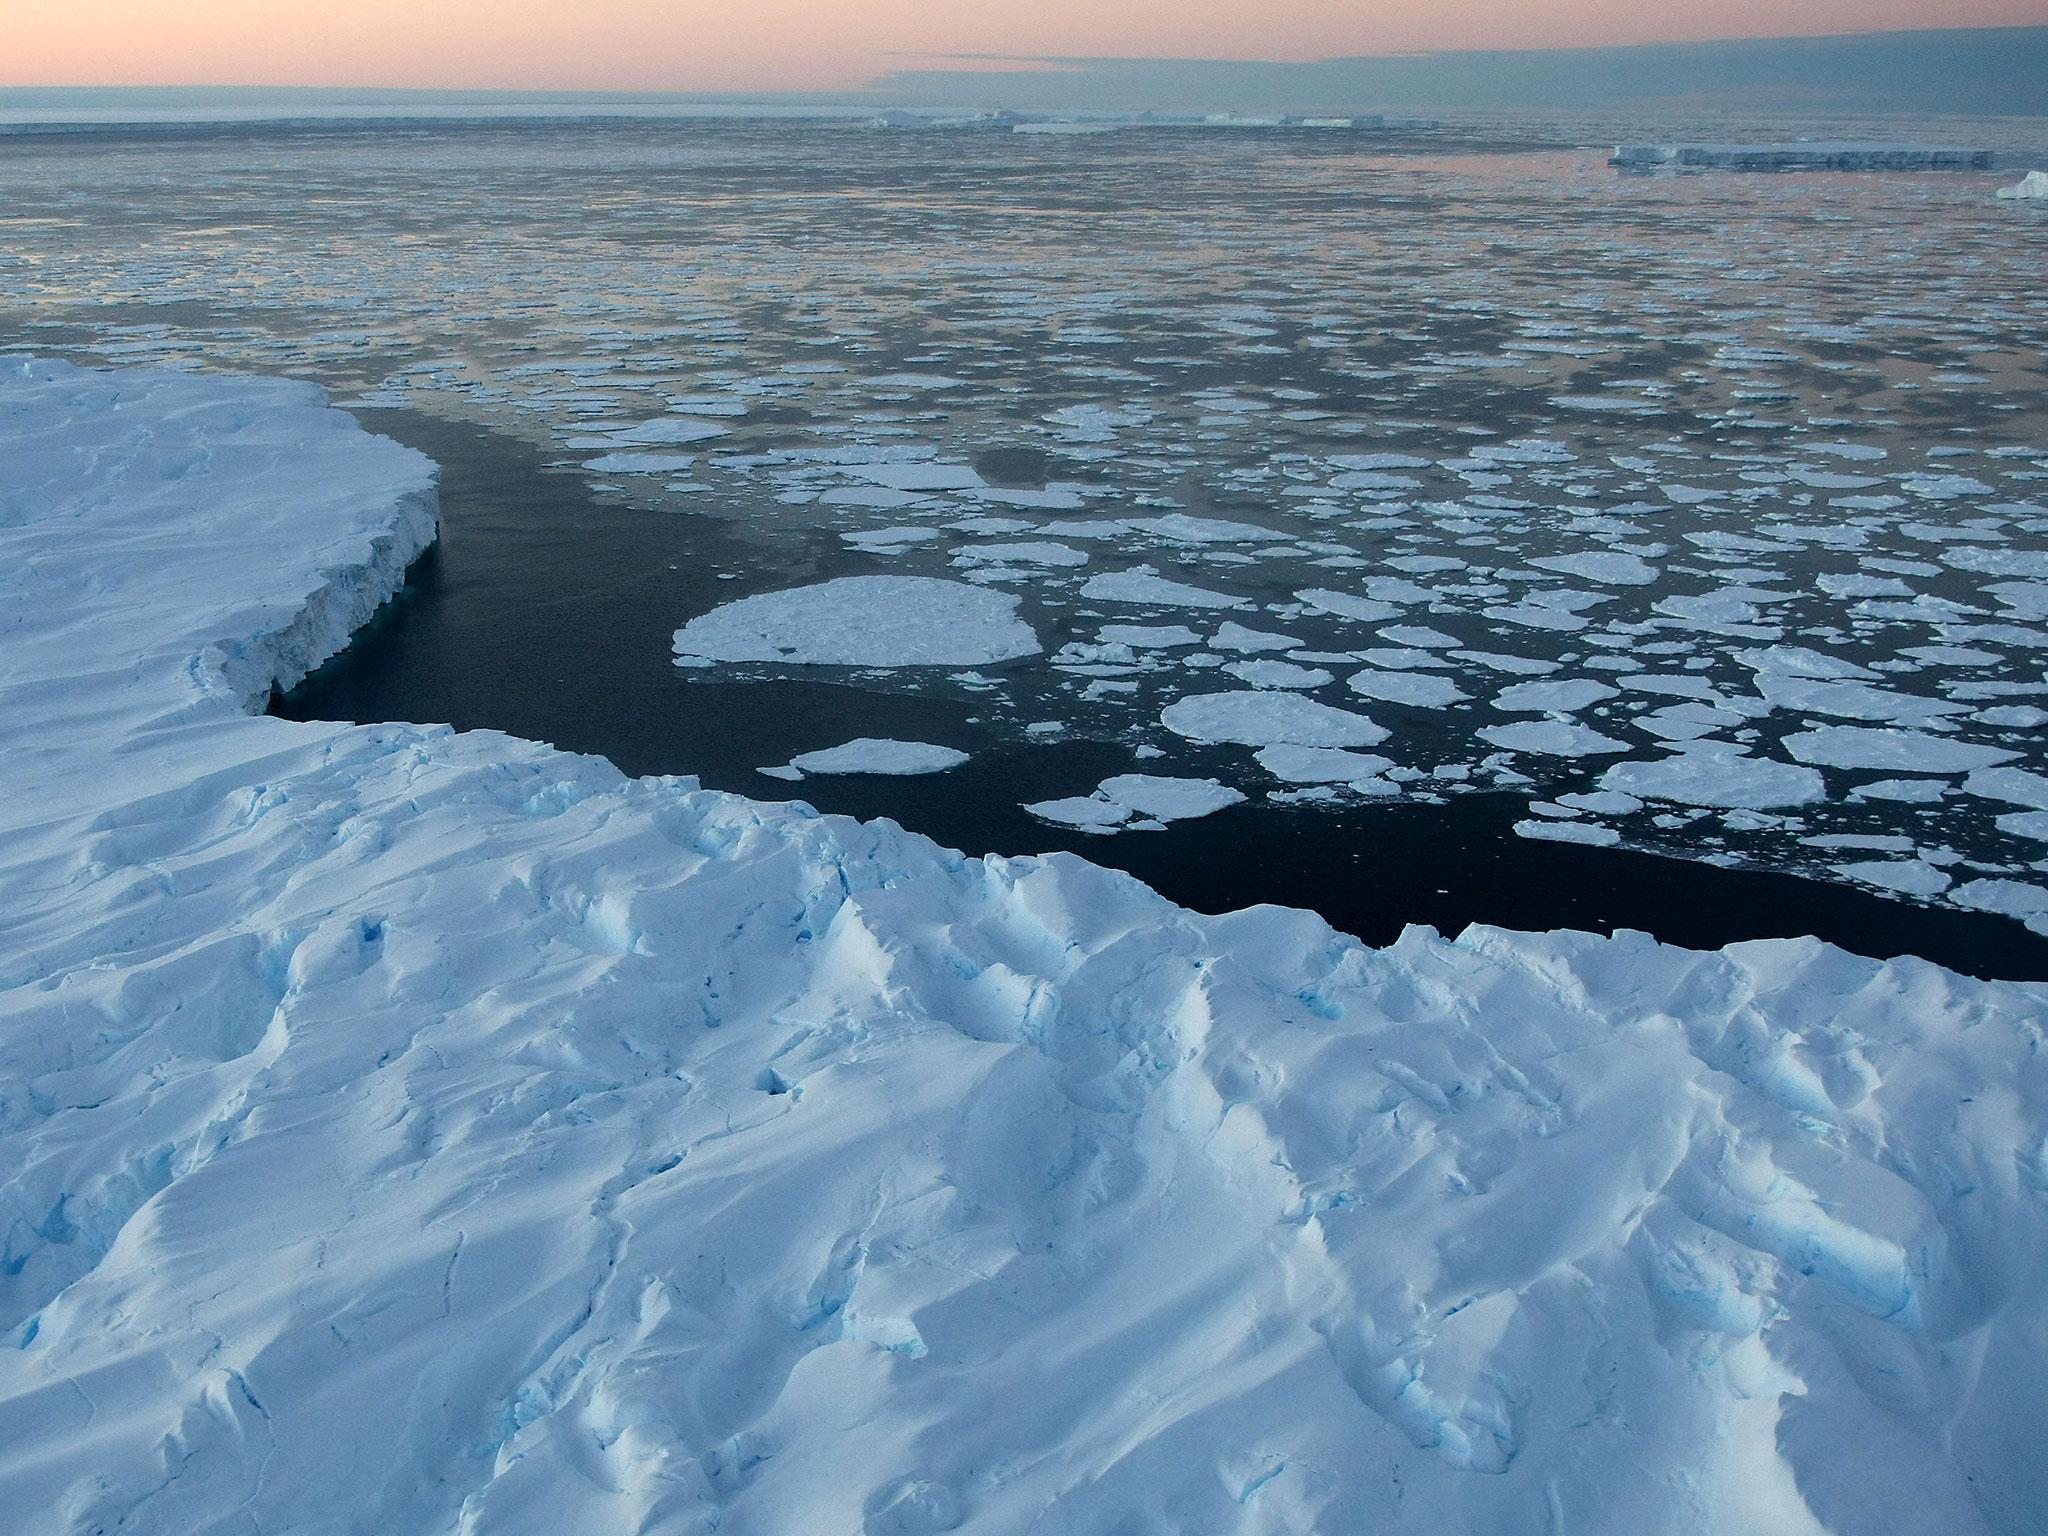 Areas of open water surrounded by ice are known as 'polynya'